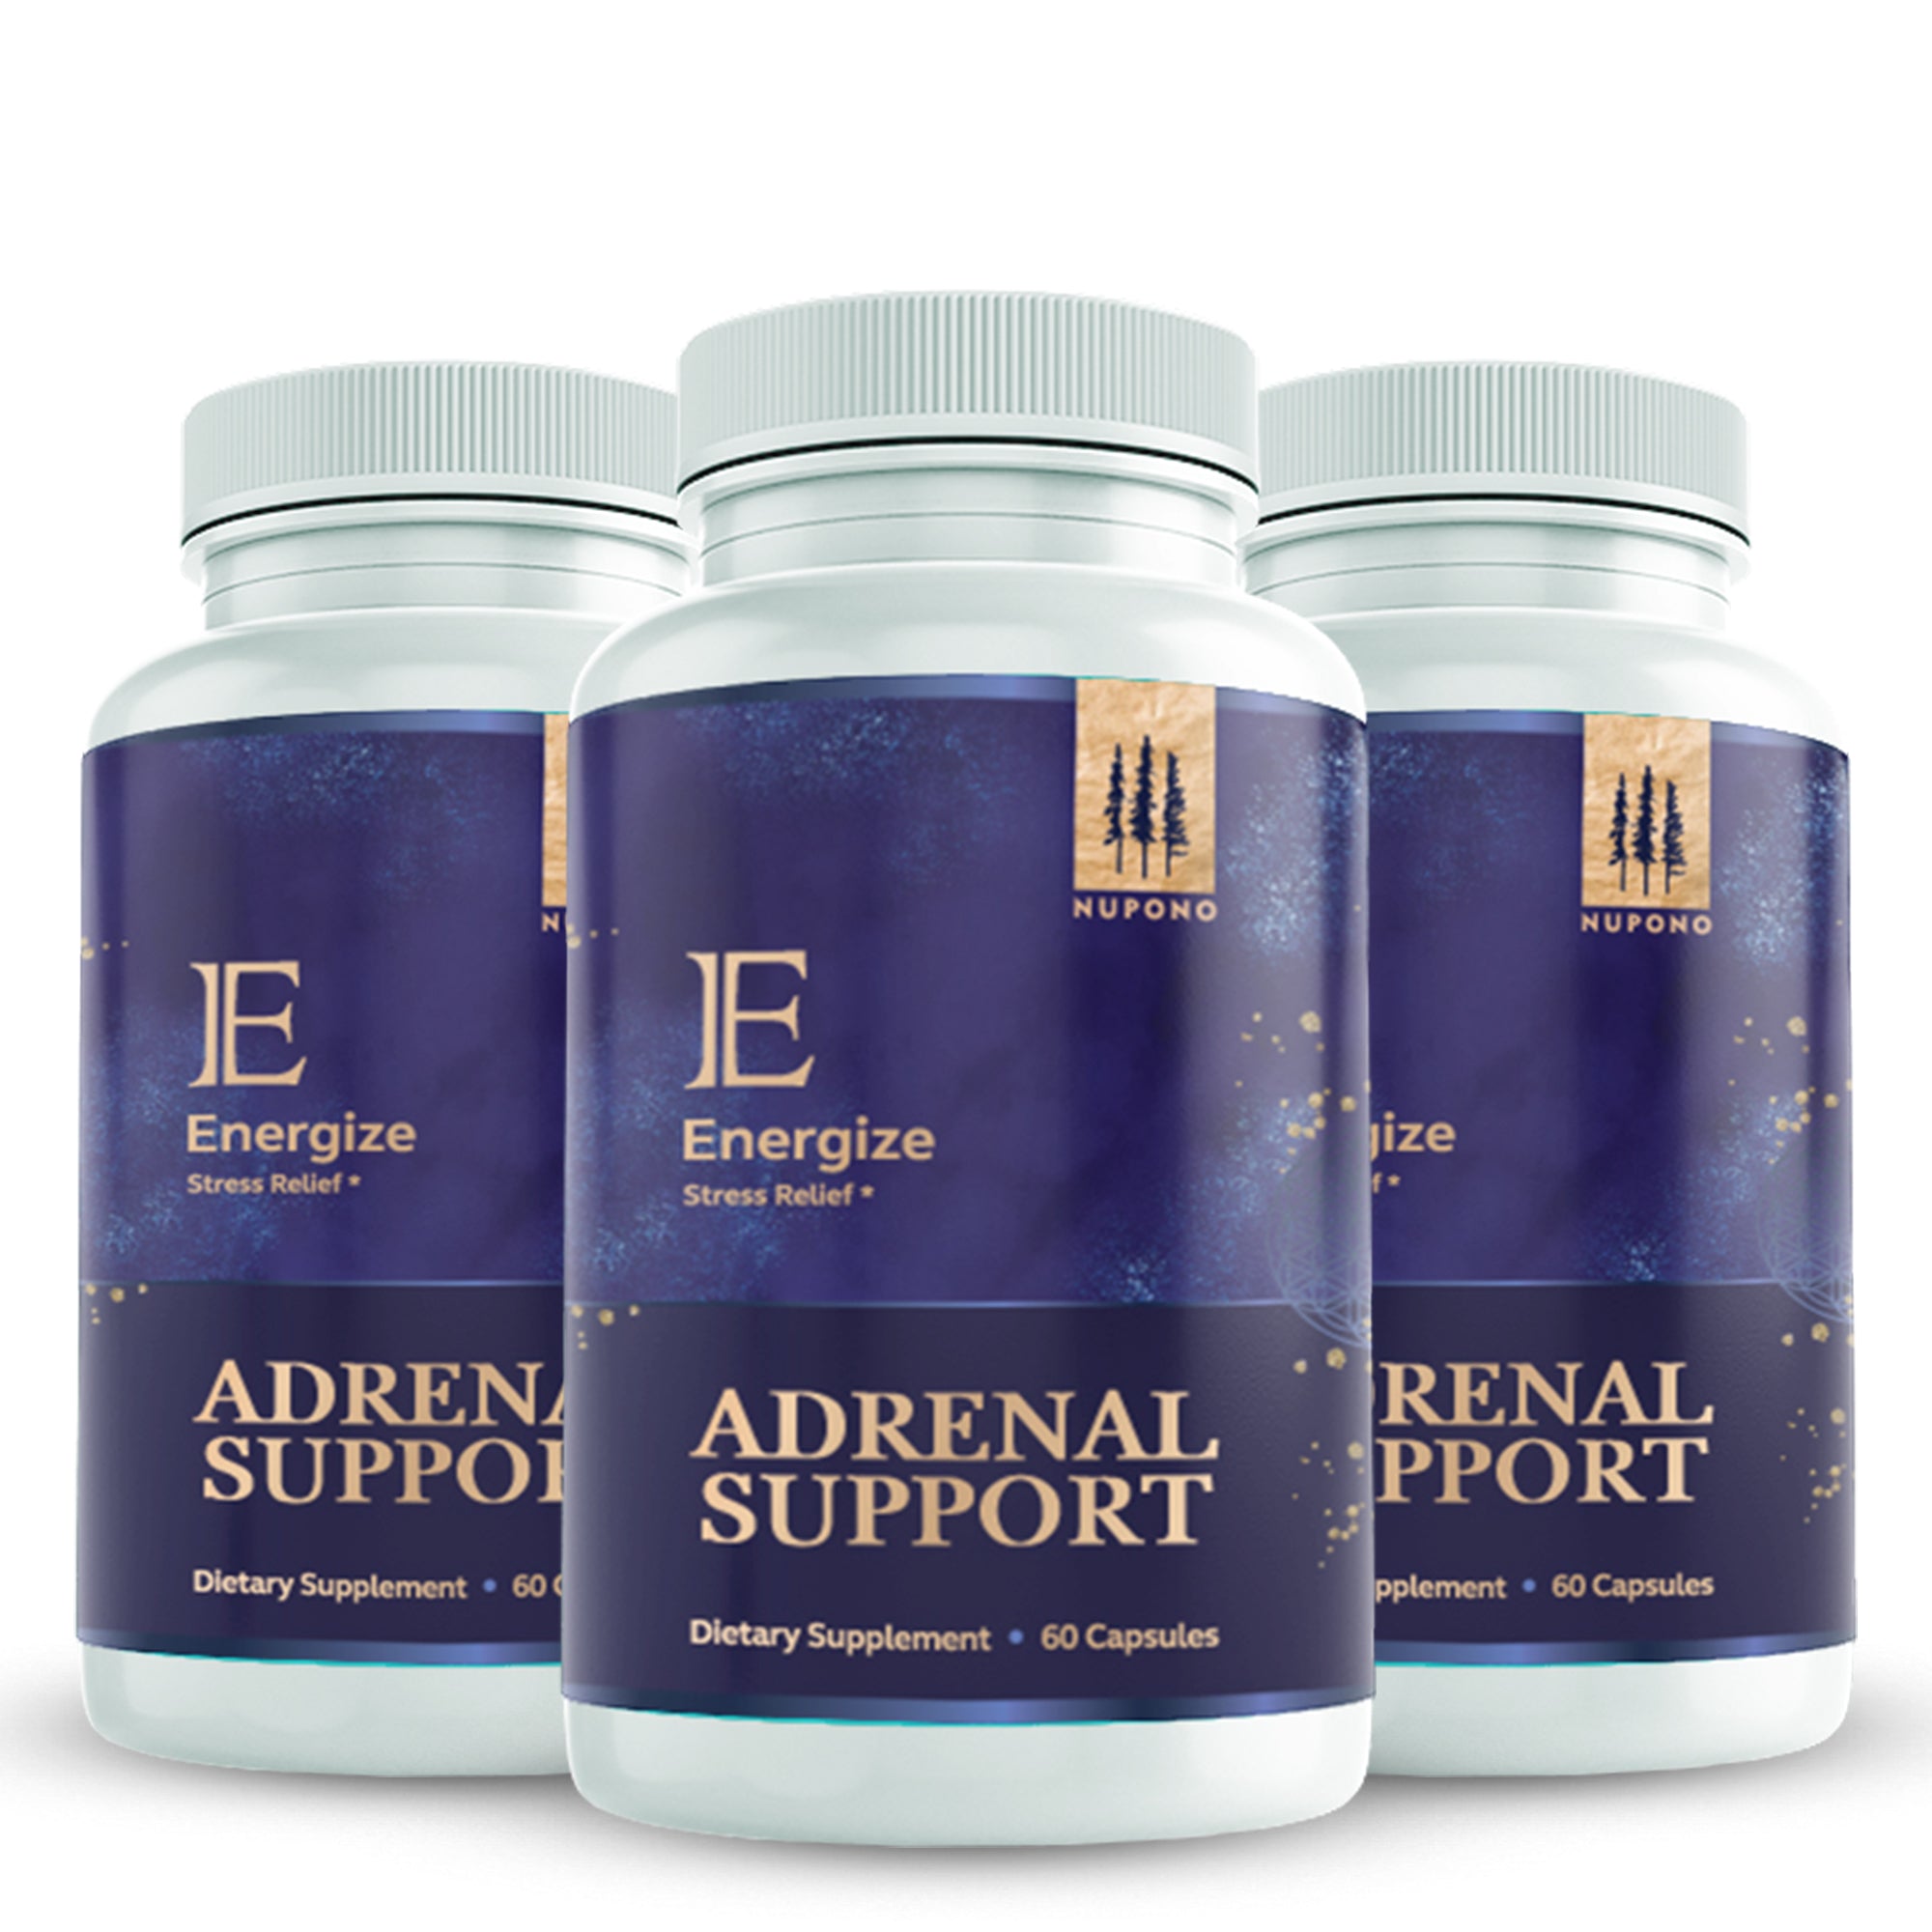 Adrenal Support Supplement 60 Capsules - Cortisol Stress & Fatigue Relief Supplements